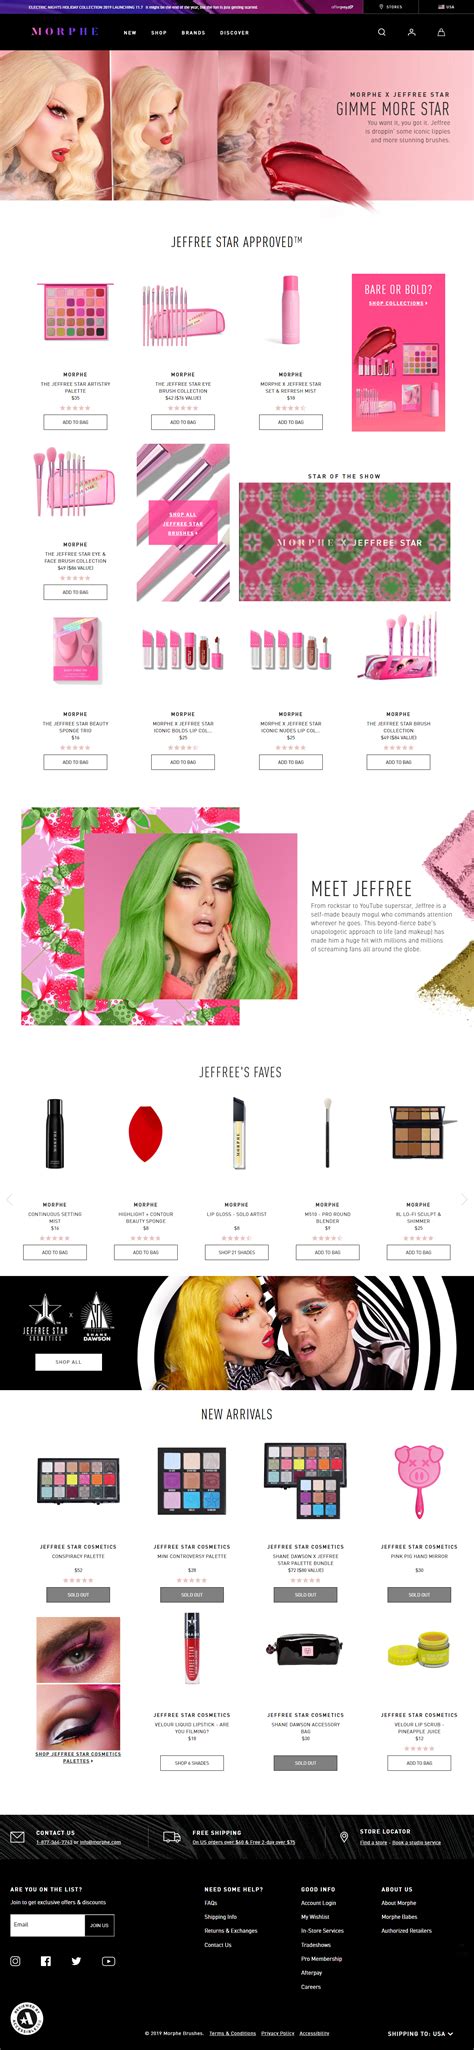 Morphe X Jeffree Star product recommendations on the web | Morphe, Jeffree star, Star brush